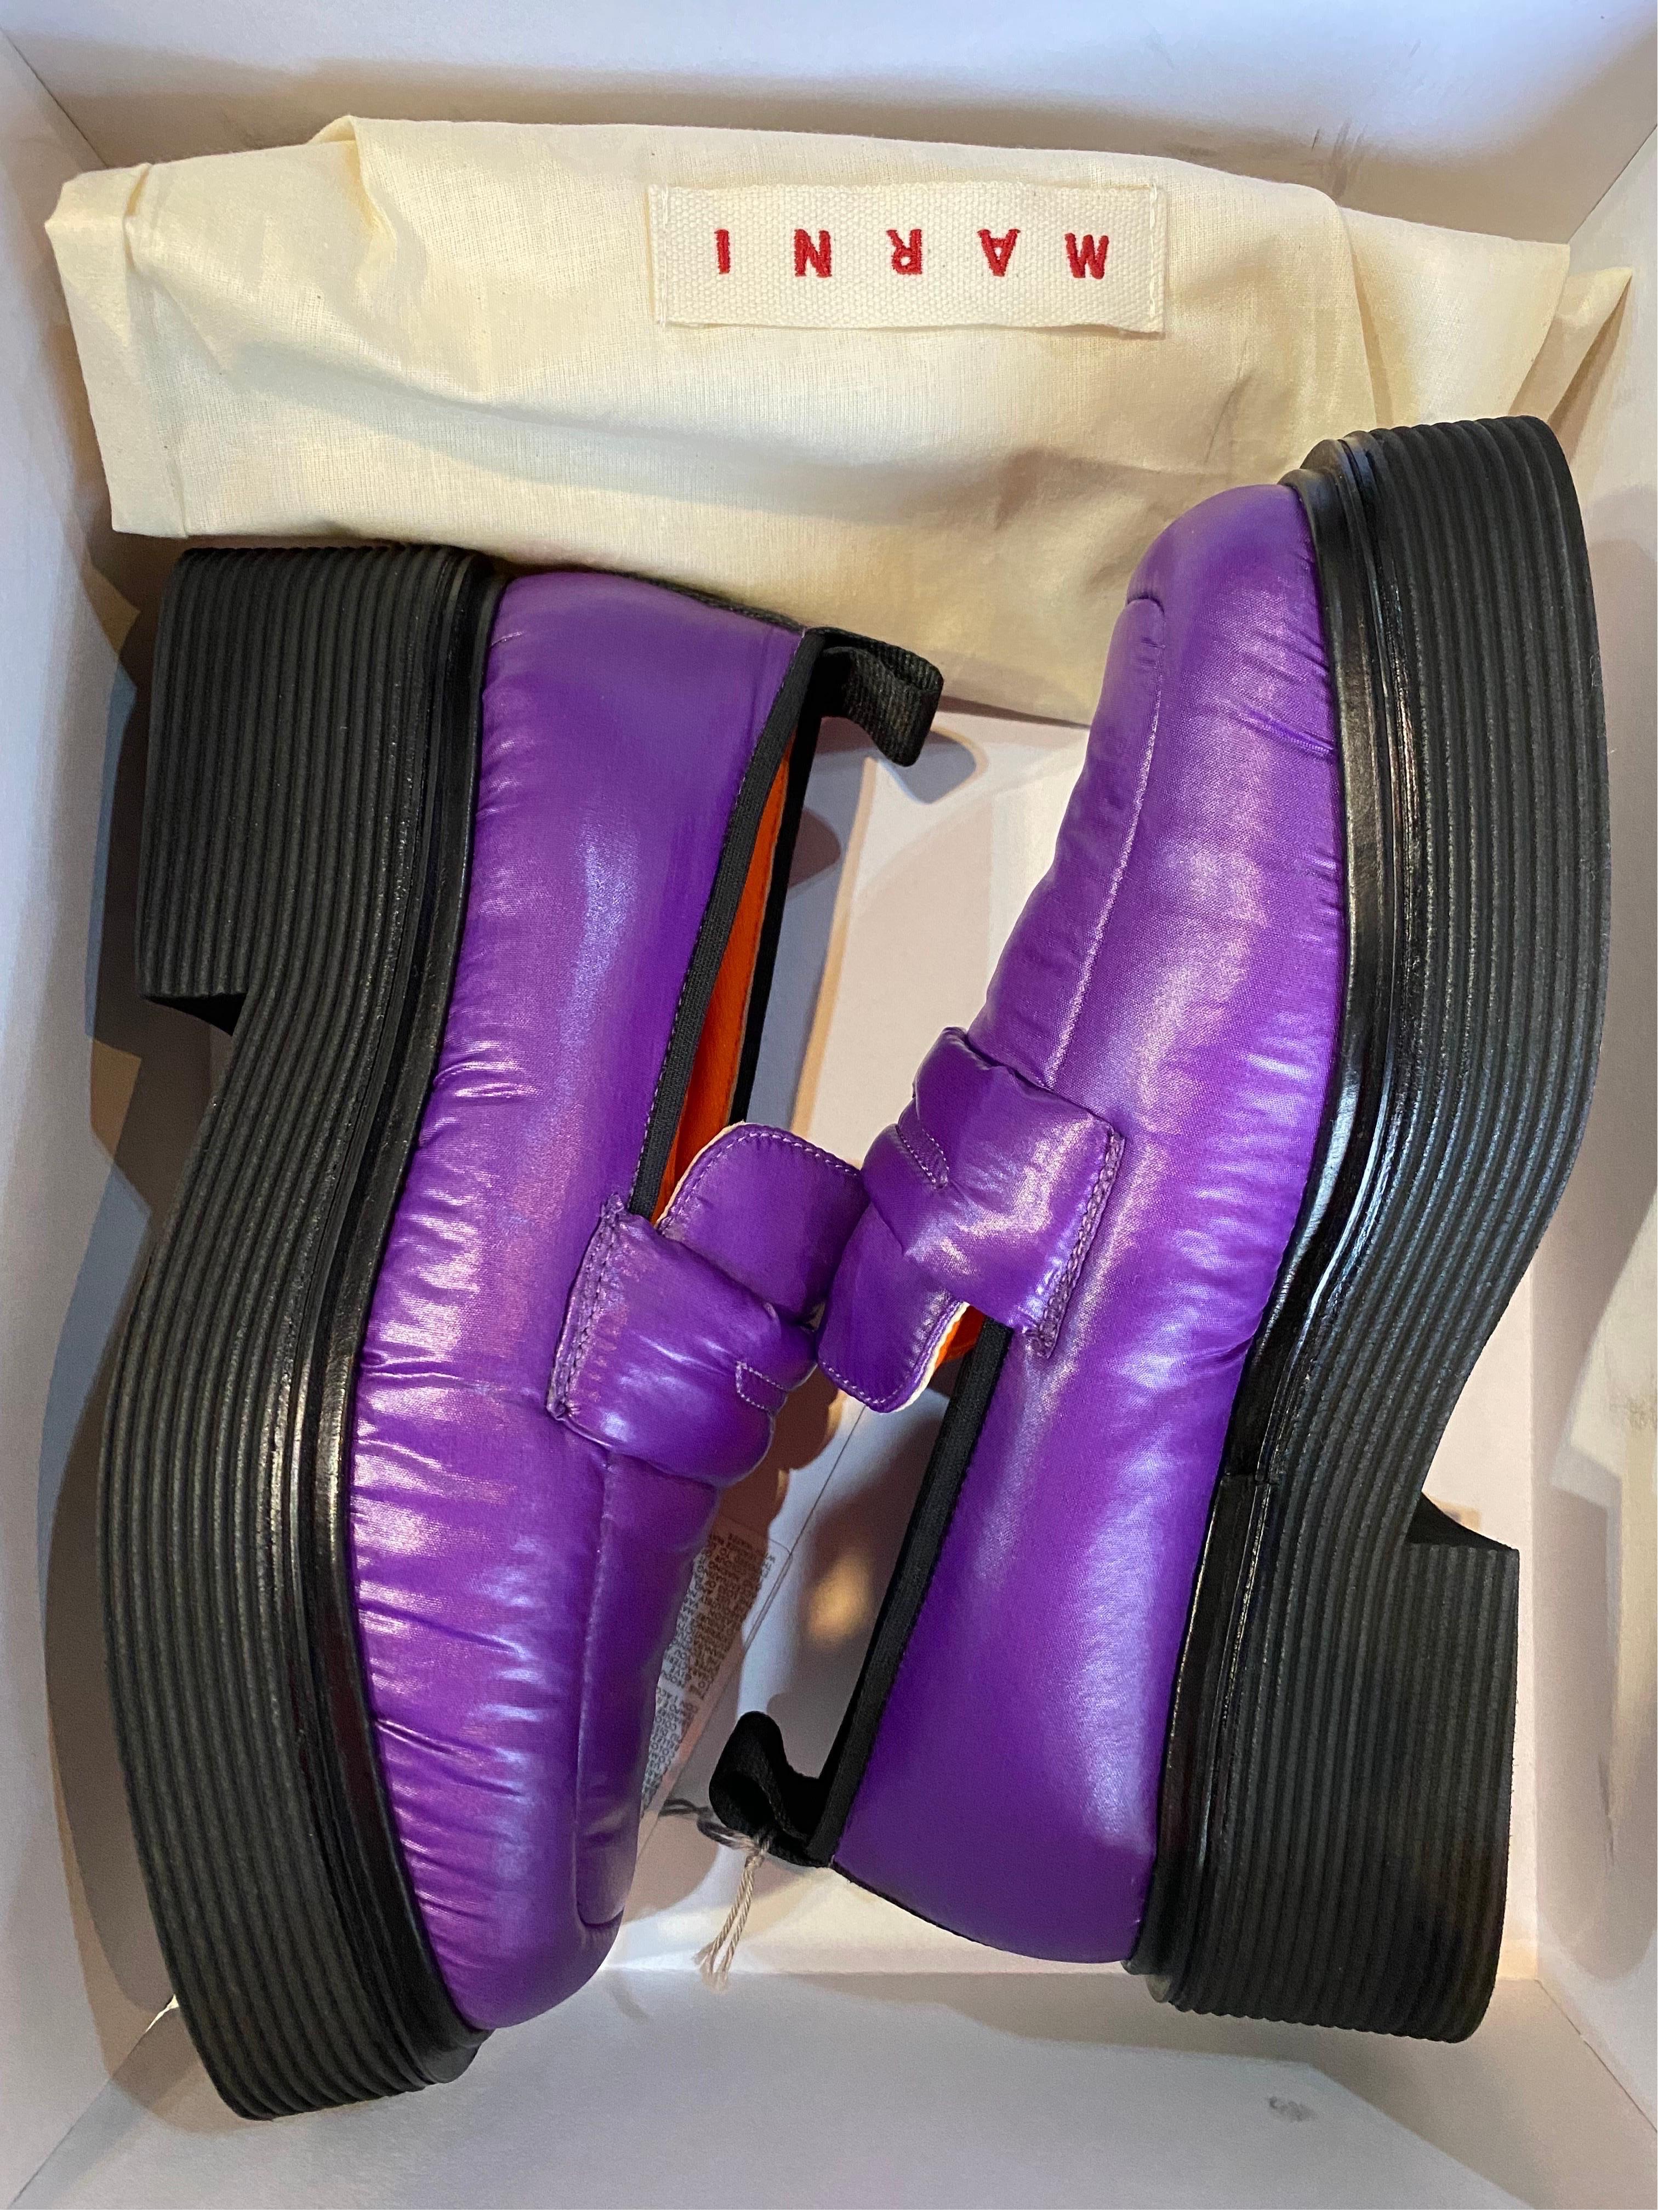 MARNI LOAFERS.
In purple technical fabric.
Orange leather interior. Rubber heel.
Number 37
Inner sole 23.5 cm
Heel 5 cm
Plateau 3 cm
New with box. Never worn.
Has a small flaw on the heel of the left shoe as shown in the photo.